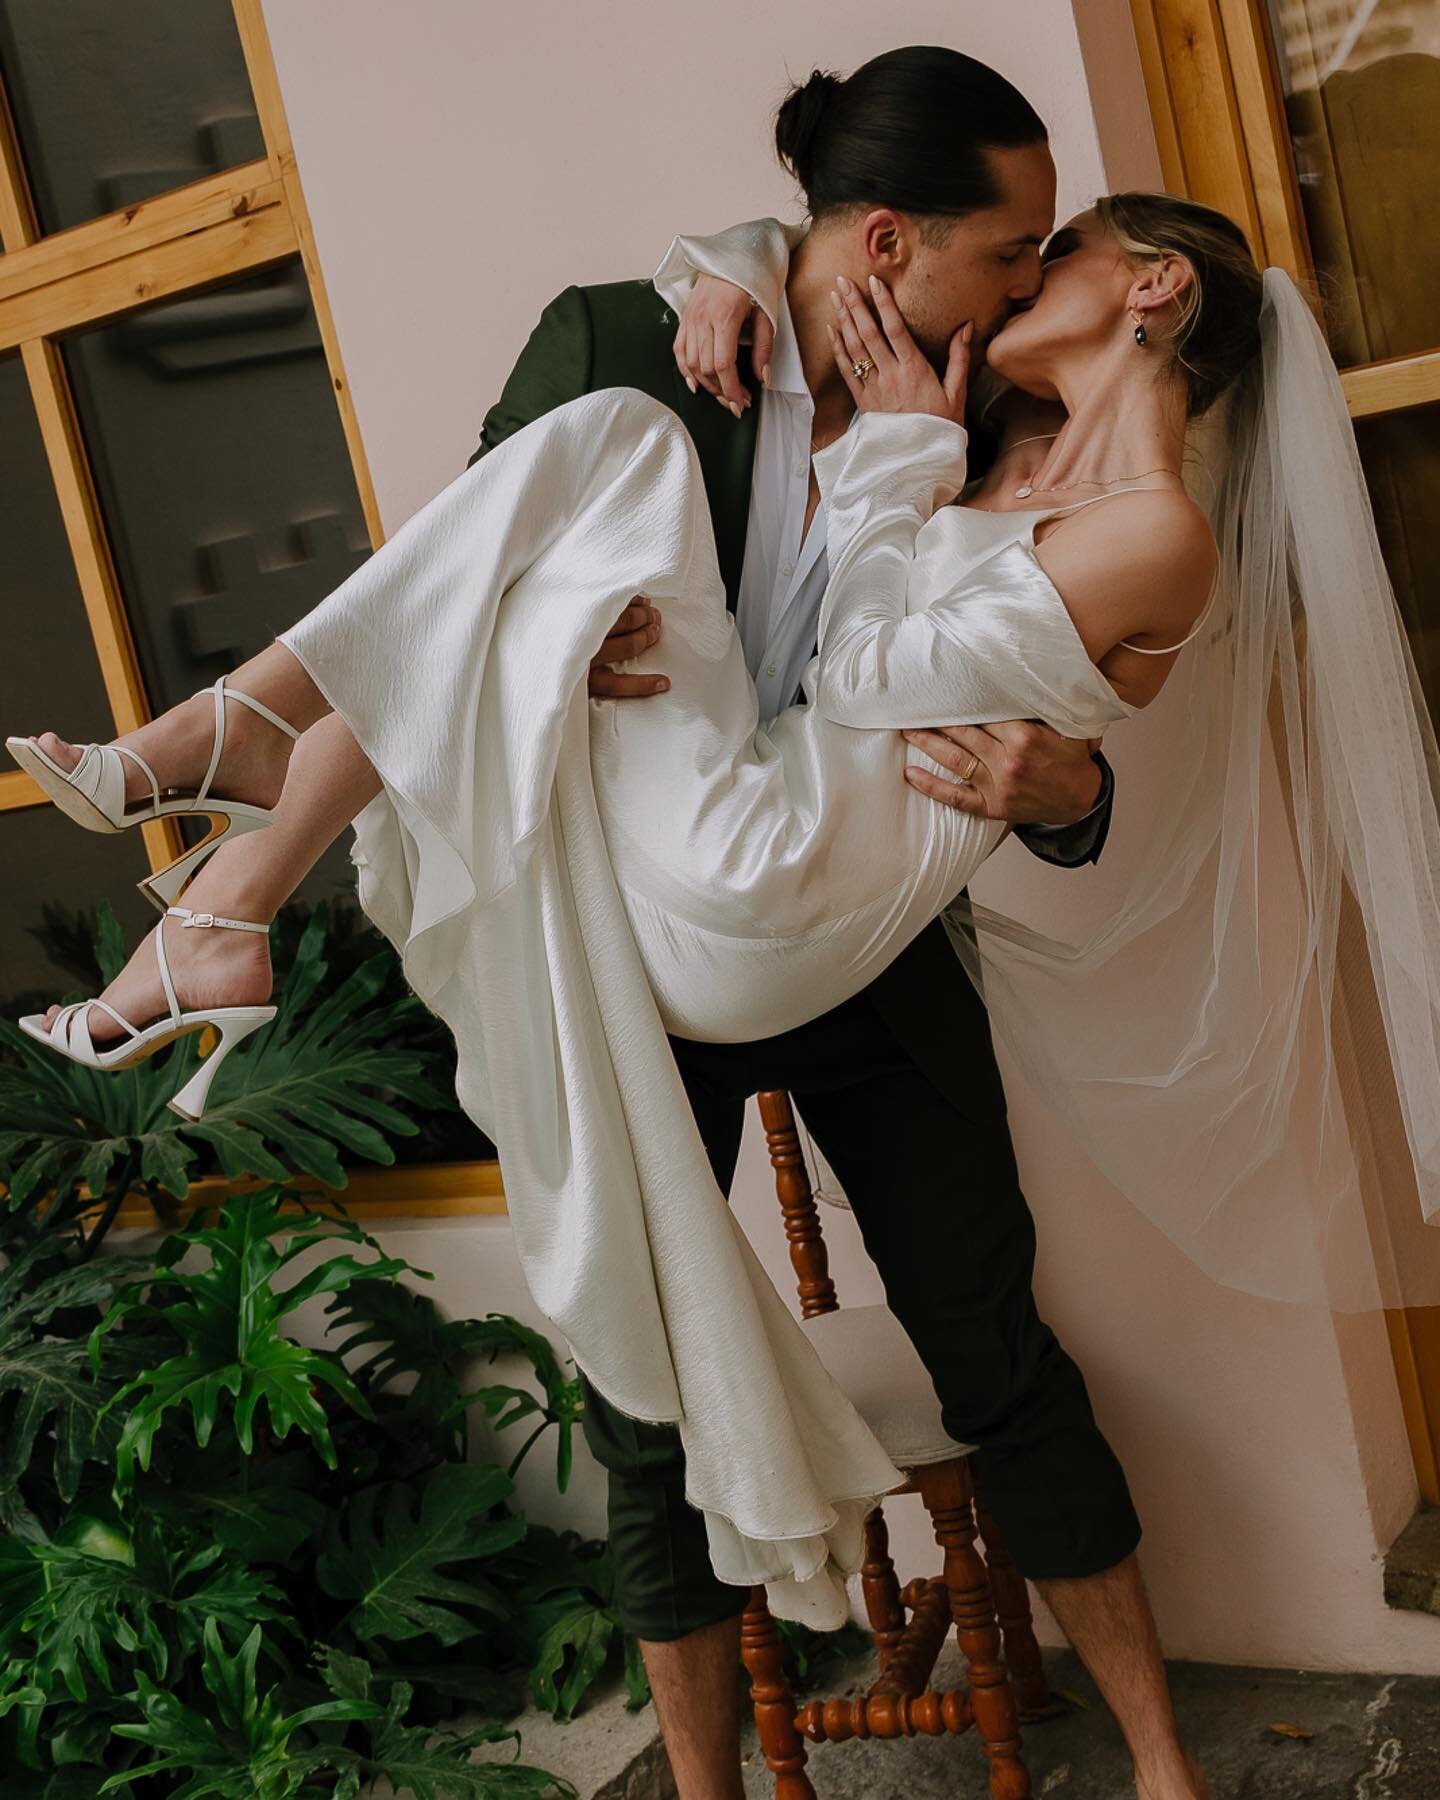 💸 The cost of a wedding in San Miguel De Allende can vary widely depending on the wedding size, the venue's location and style, and the vendors and services involved. 

However, here is a rough estimate of the average cost of a wedding in San Miguel